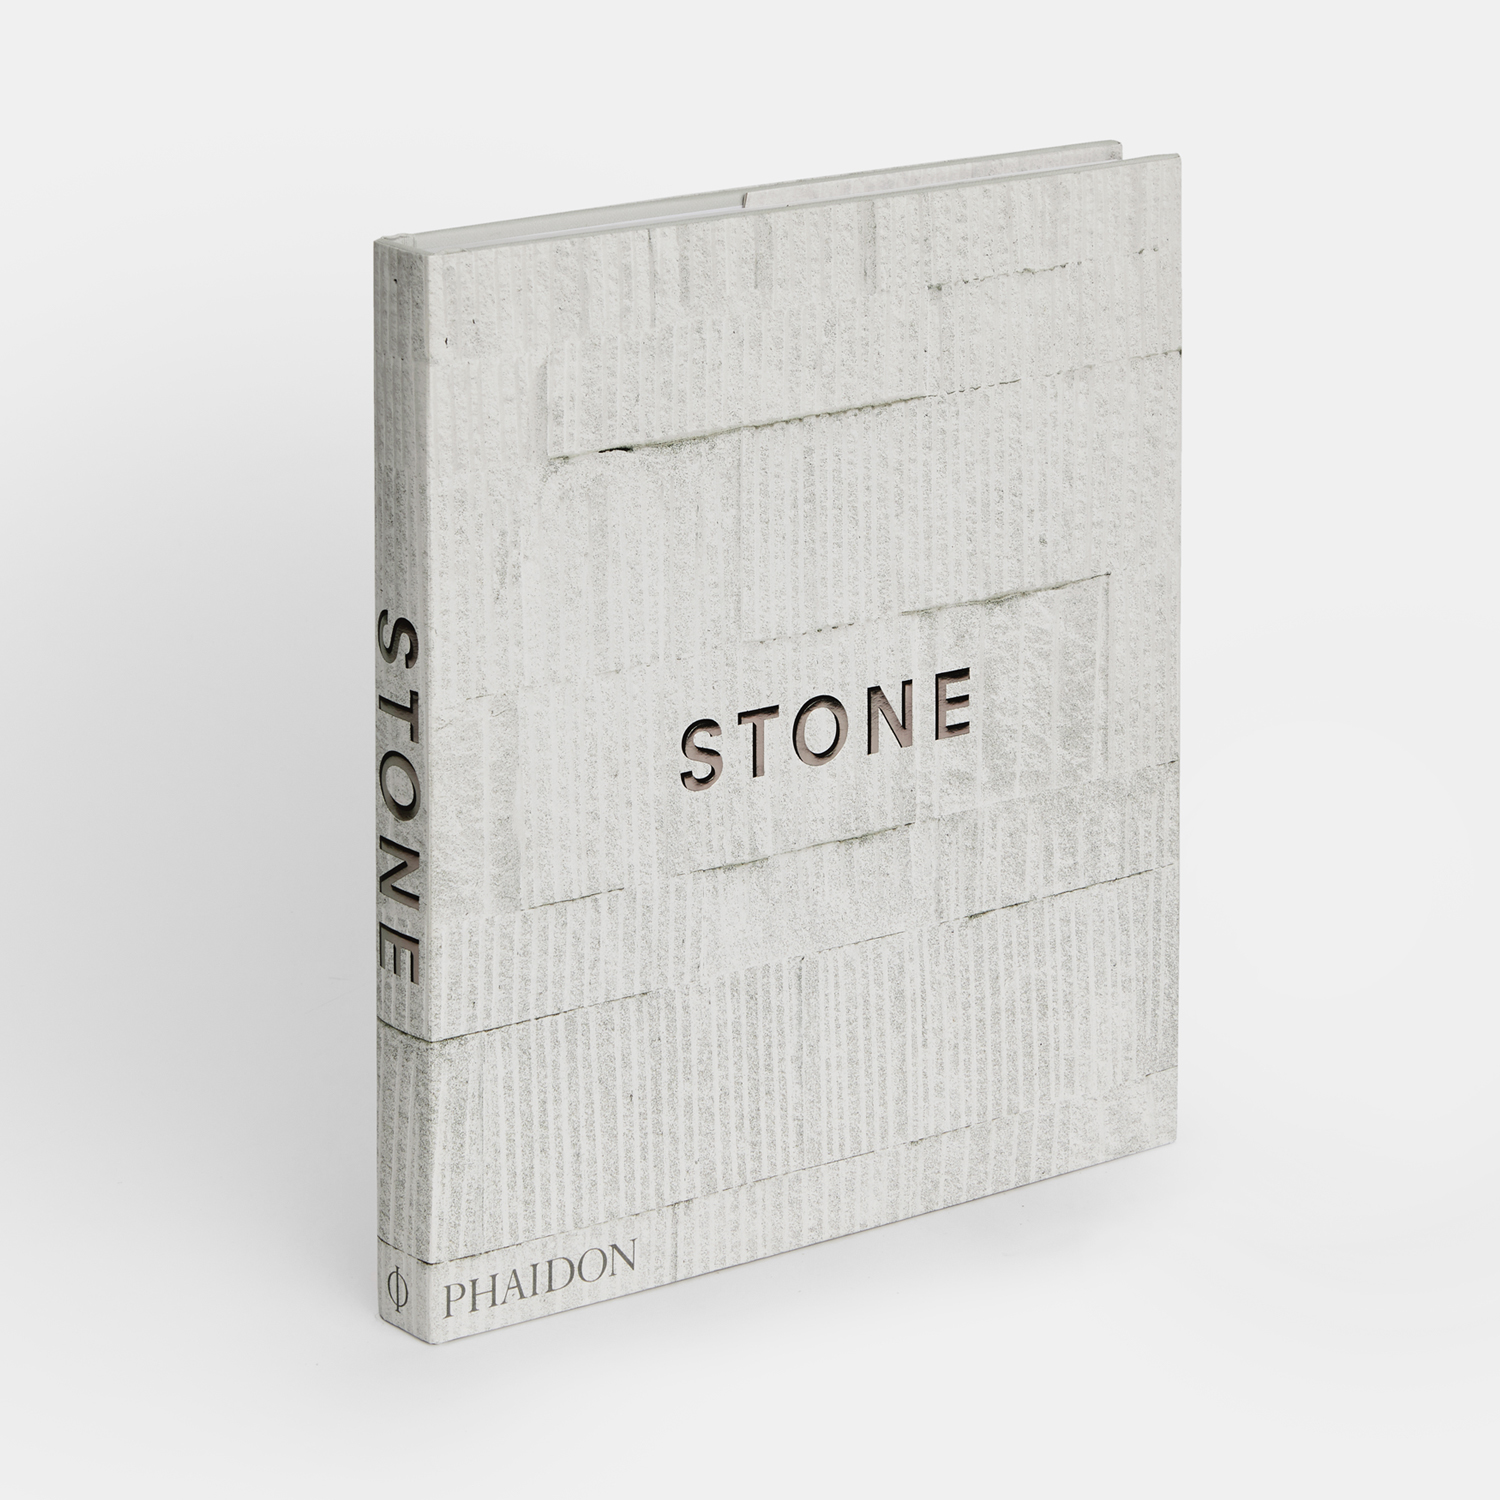 All you need to know about Stone